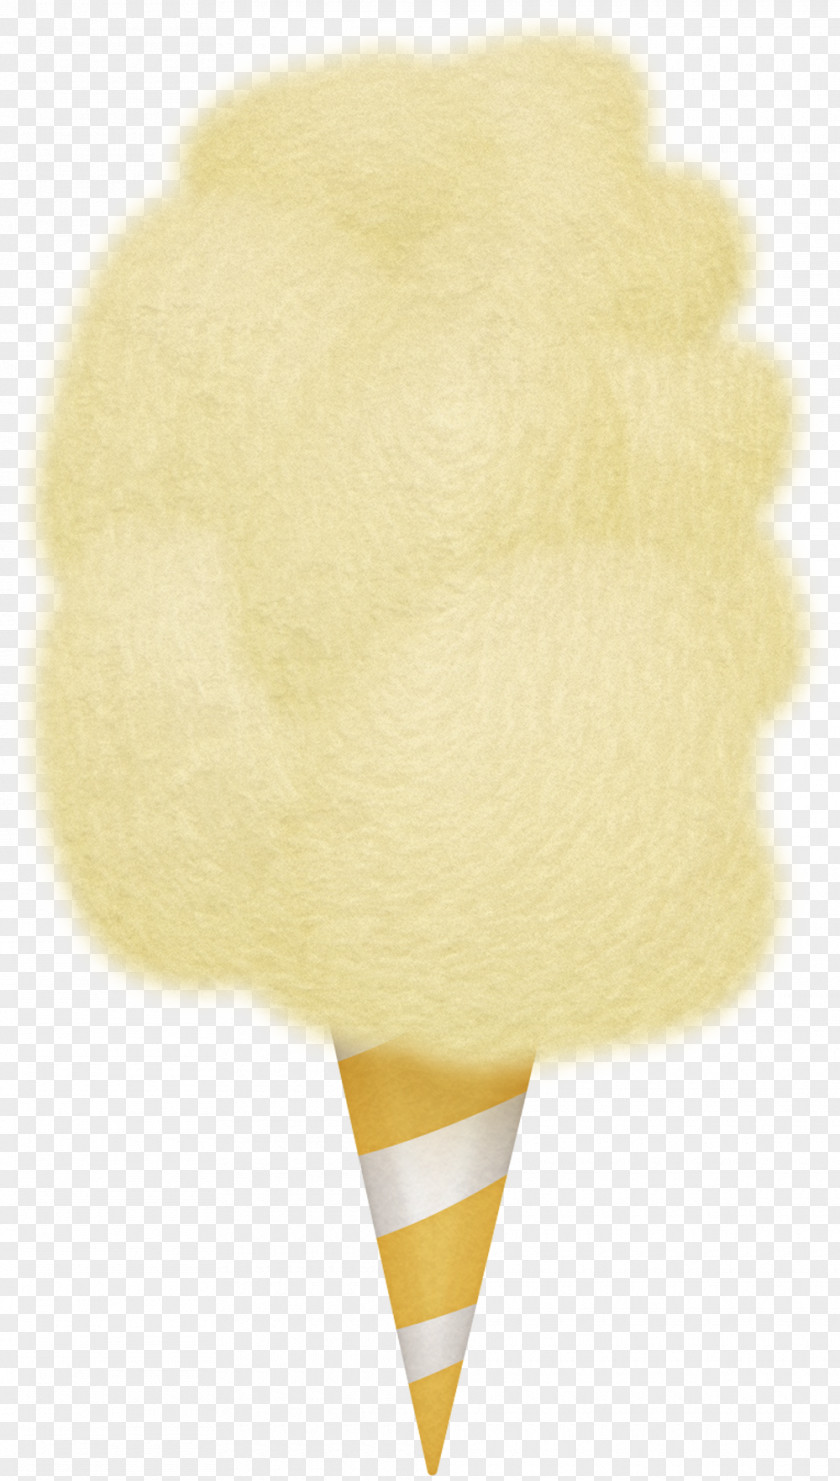 Cotton Candy Ice Cream Cone PNG